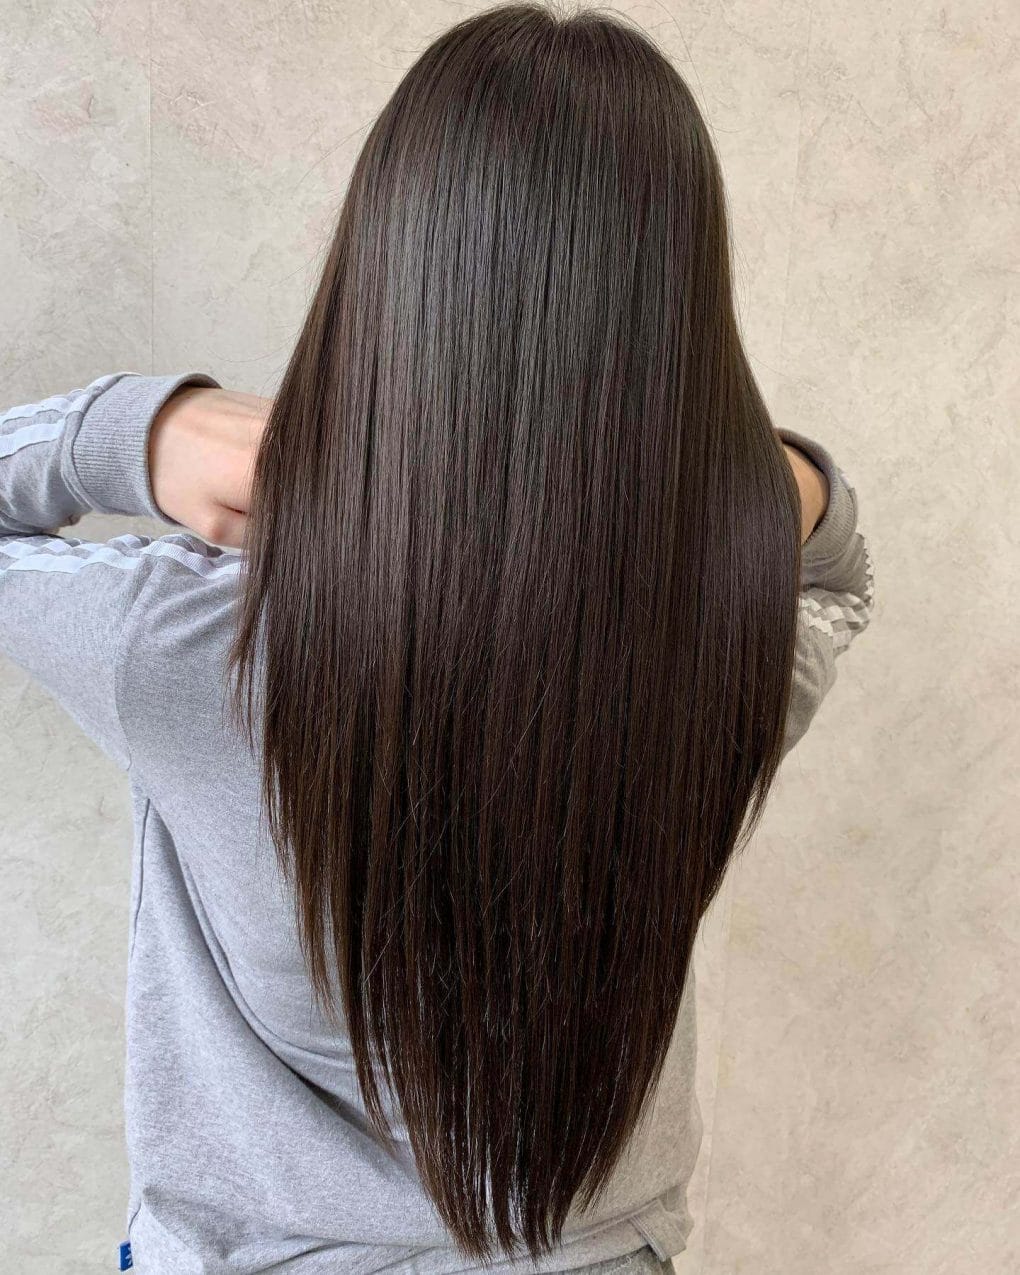 Long brunette hair styled in a V-layered cut for a sophisticated look.